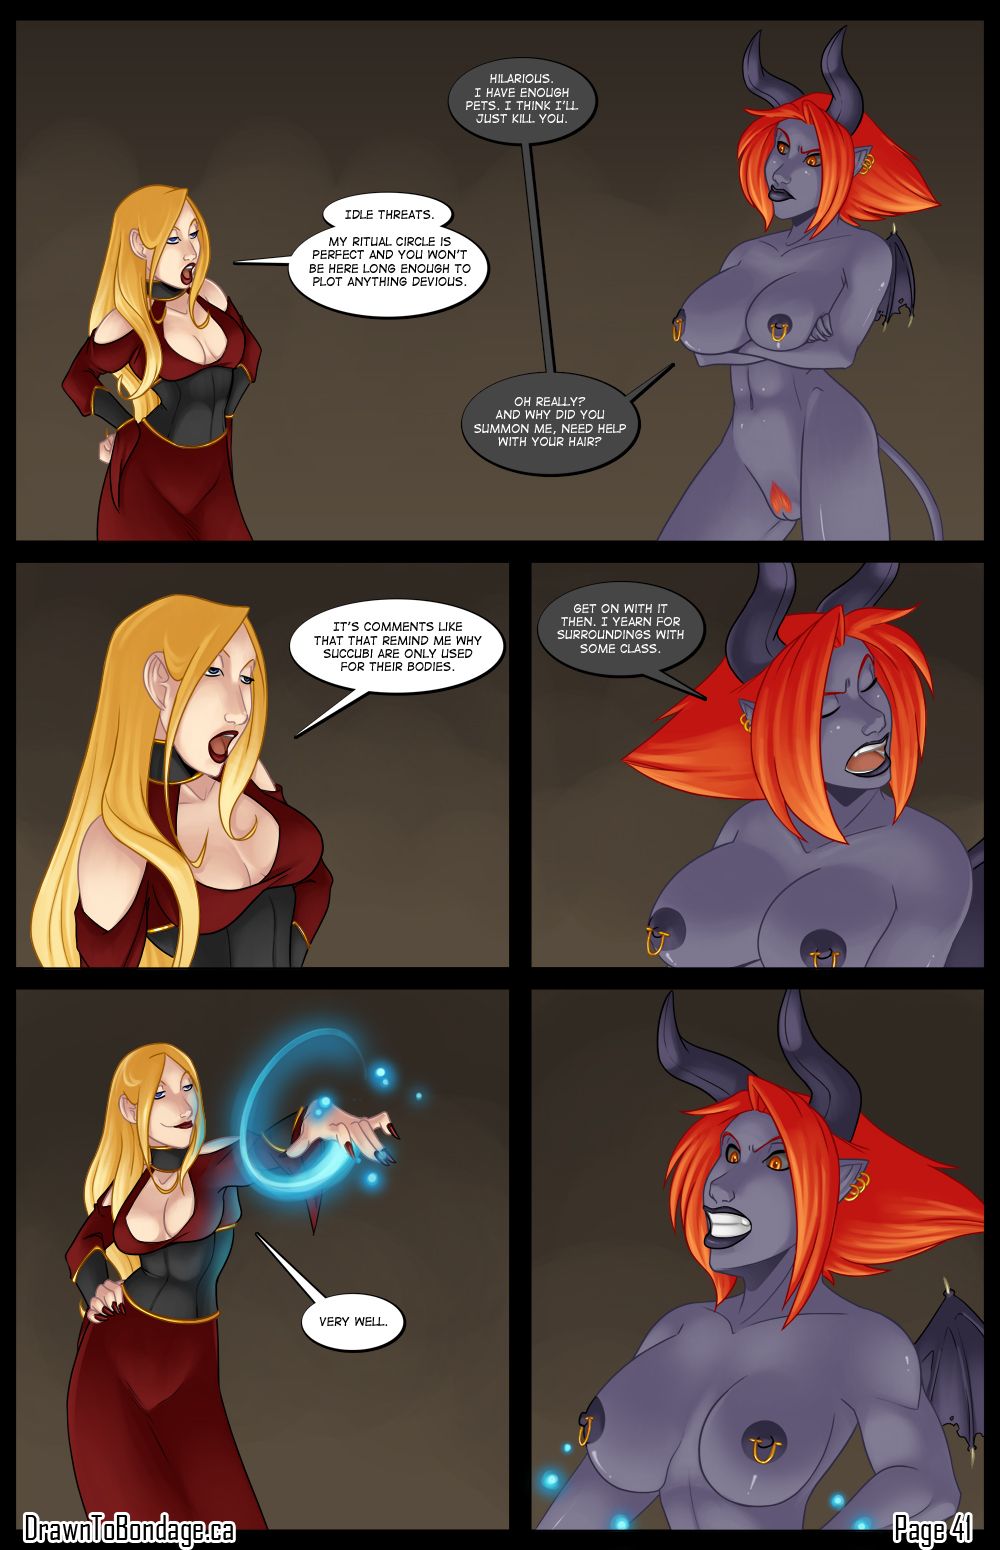 Night elf and other horny babes having fun in comics